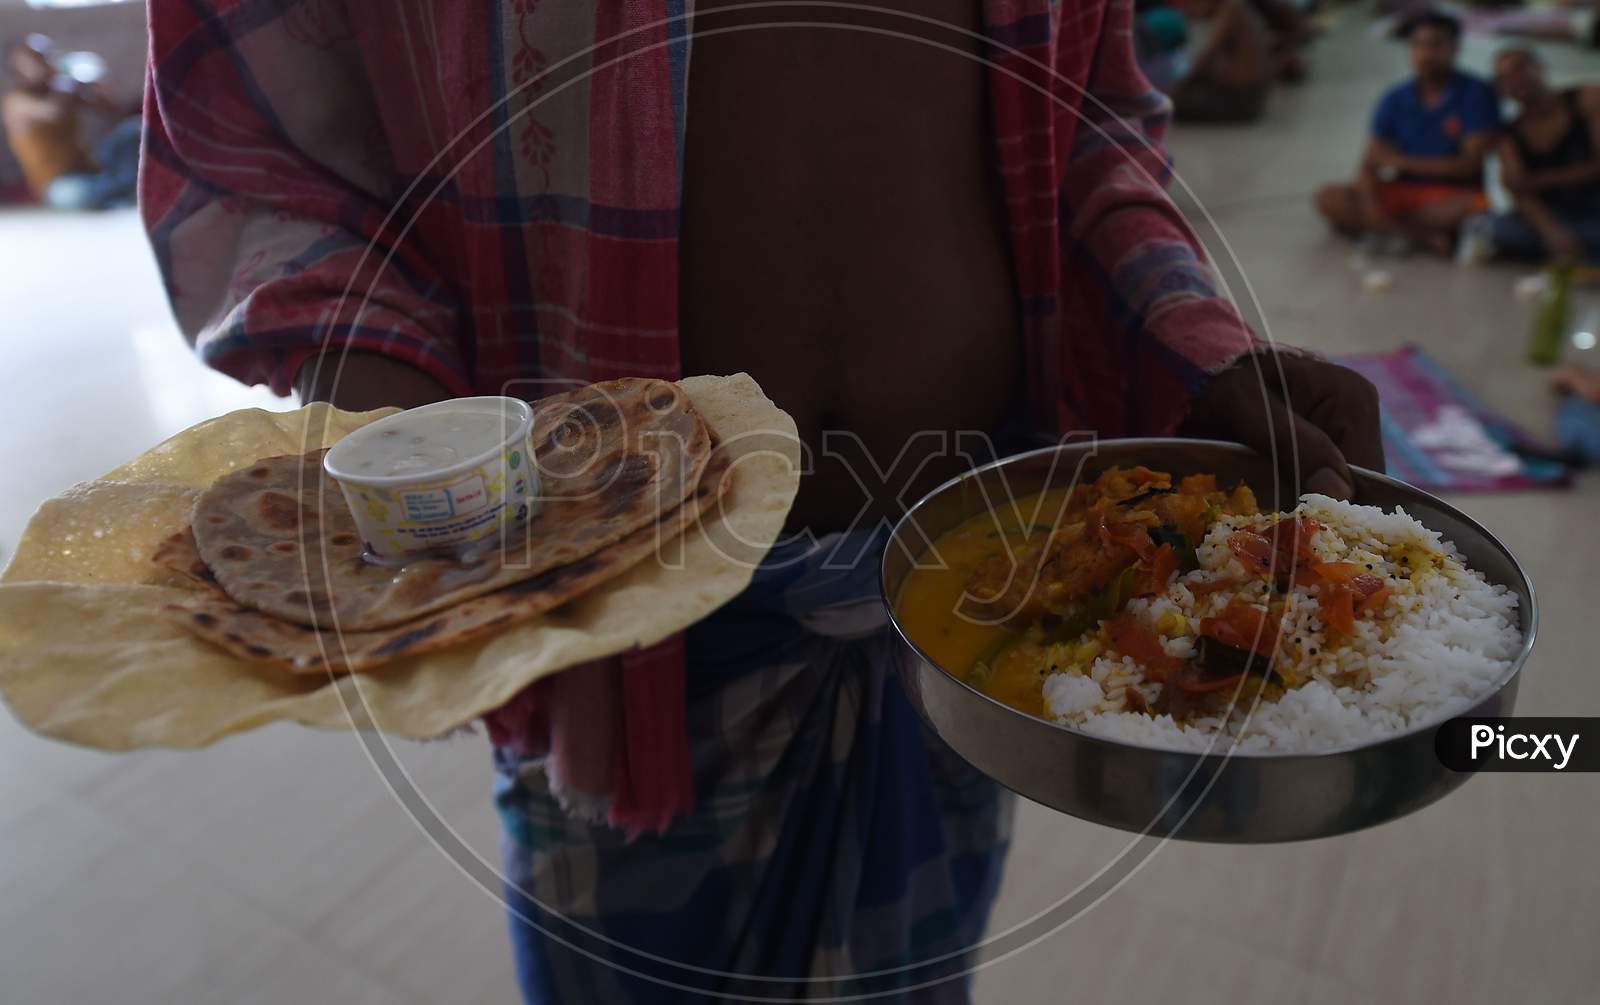  Migrant Workers Eat At Their Camp During A Government-Imposed Nationwide Lockdown As A Preventive Measure Against The Covid-19 Coronavirus, In Chennai.